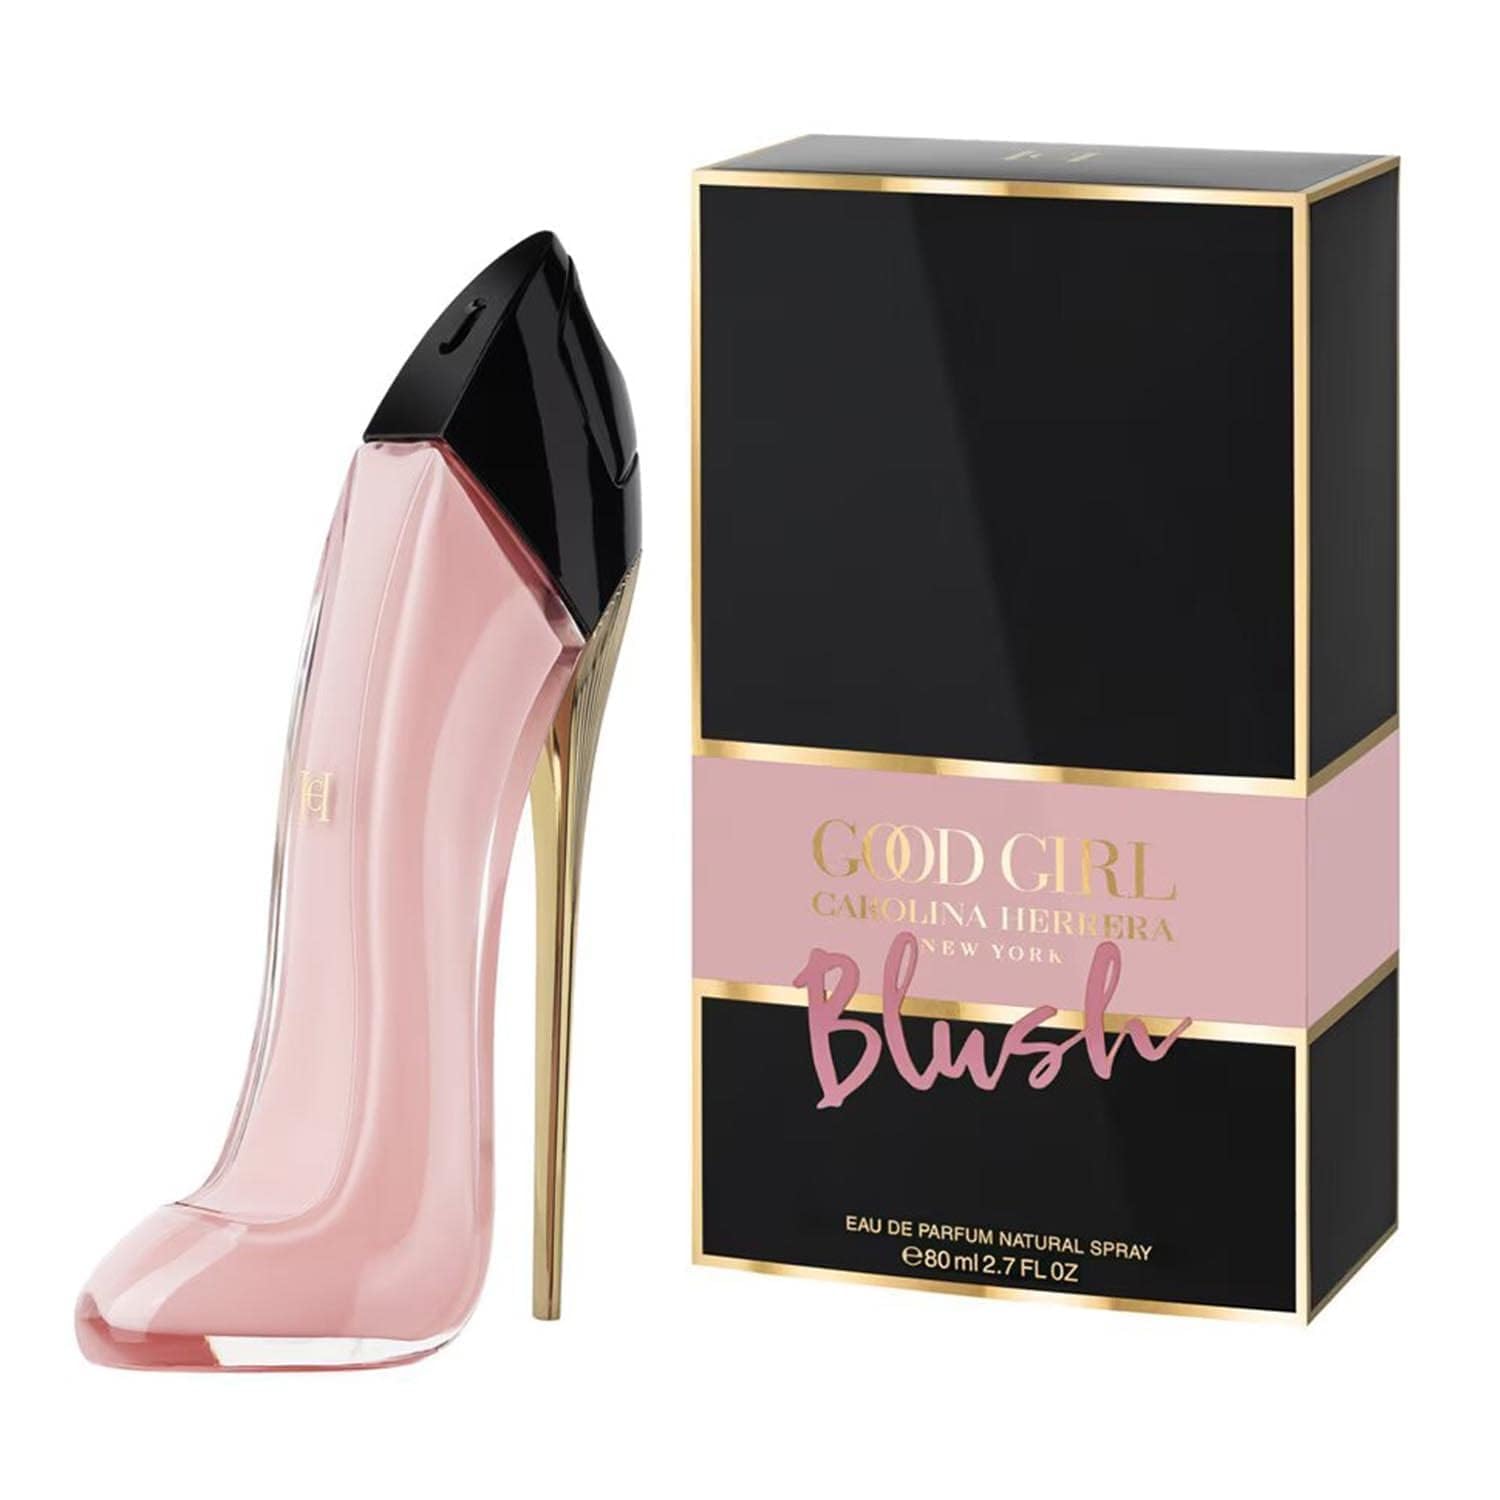 <p class="c-small-font c-margin-bottom-2v description" data-auto="product-description" data-mce-fragment="1" itemprop="description">Good Girl Blush Eau de Parfum by Carolina Herrera is a fresh and floral explosion of contrasts that forms a powdery expression of femininity. This radiant woman's perfume is a re-invention of the iconic Good Girl scent. Housed in a blush-pink stiletto, Good Girl Blush reveals the multifaceted nature of modern womanhood with a double dose of vanilla and the pastel romanticism of peony, evoked with two forms of ylang ylang and upcycled rosewater.</p>